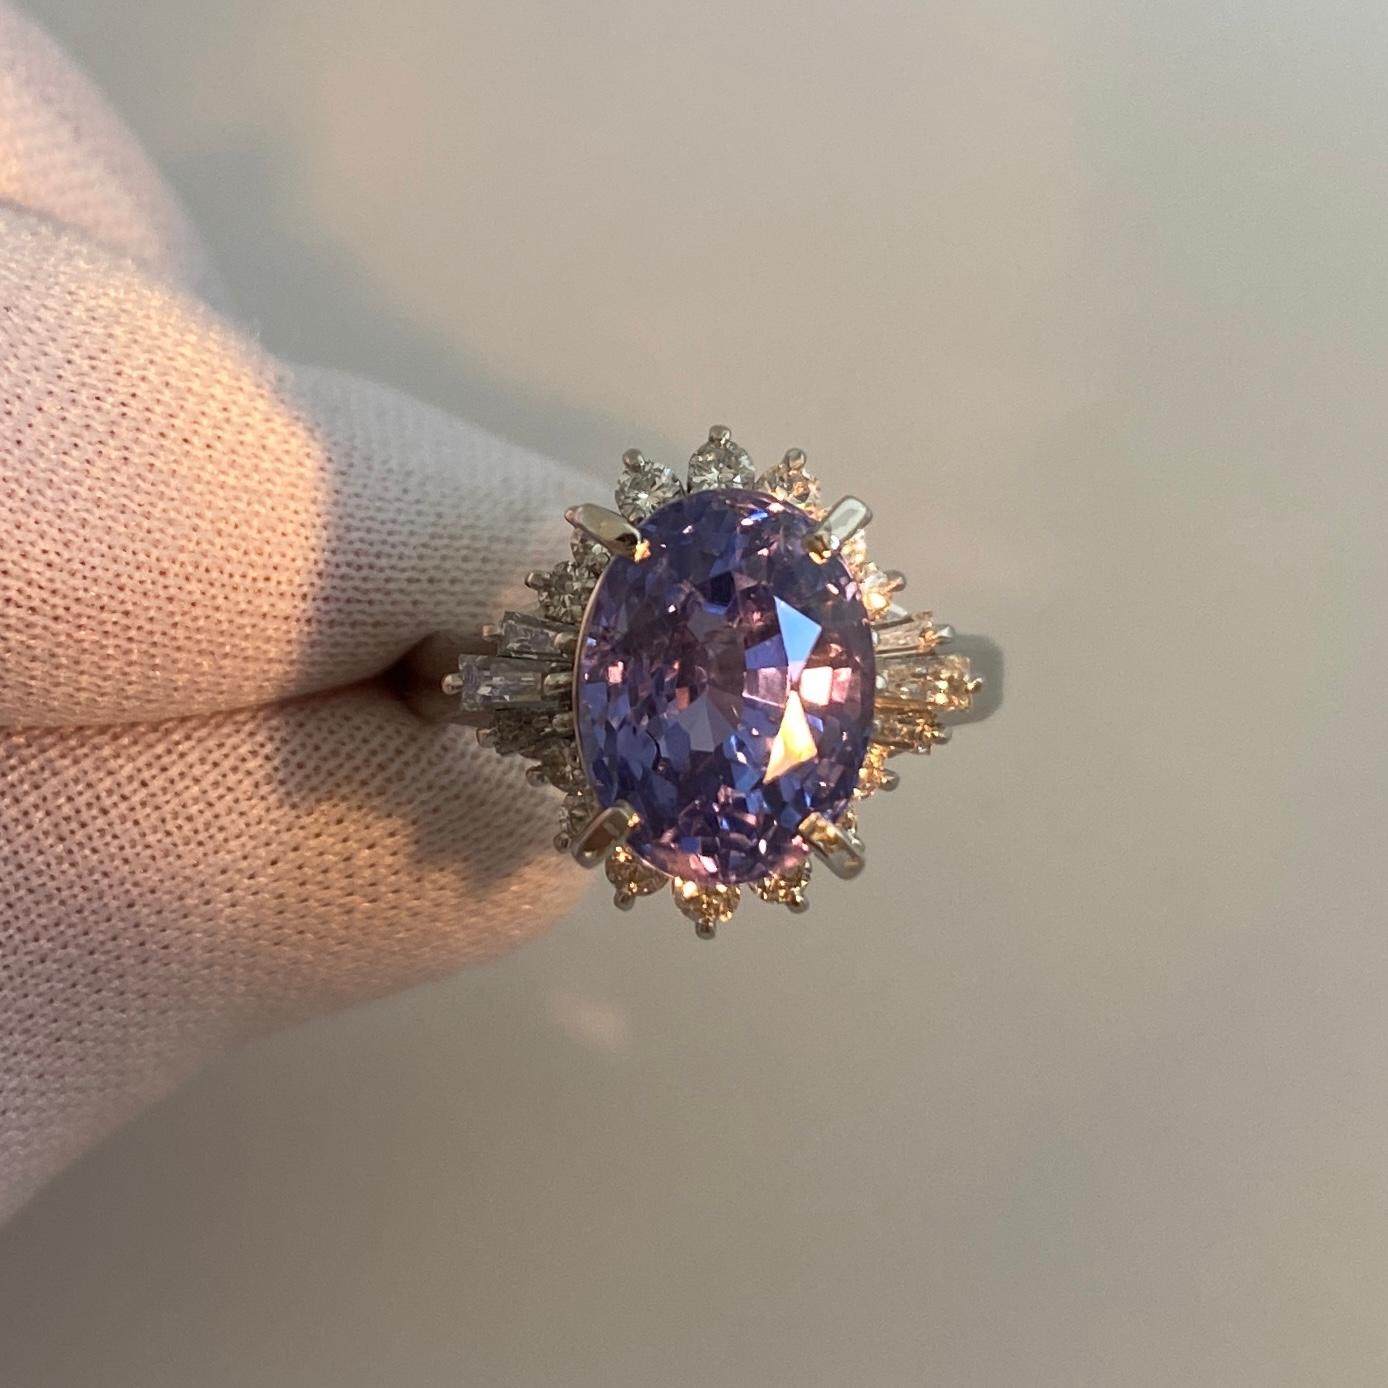 GIA Certified 7.08 Carat Untreated Color Change Sapphire & Diamond Cocktail Ring For Sale 5